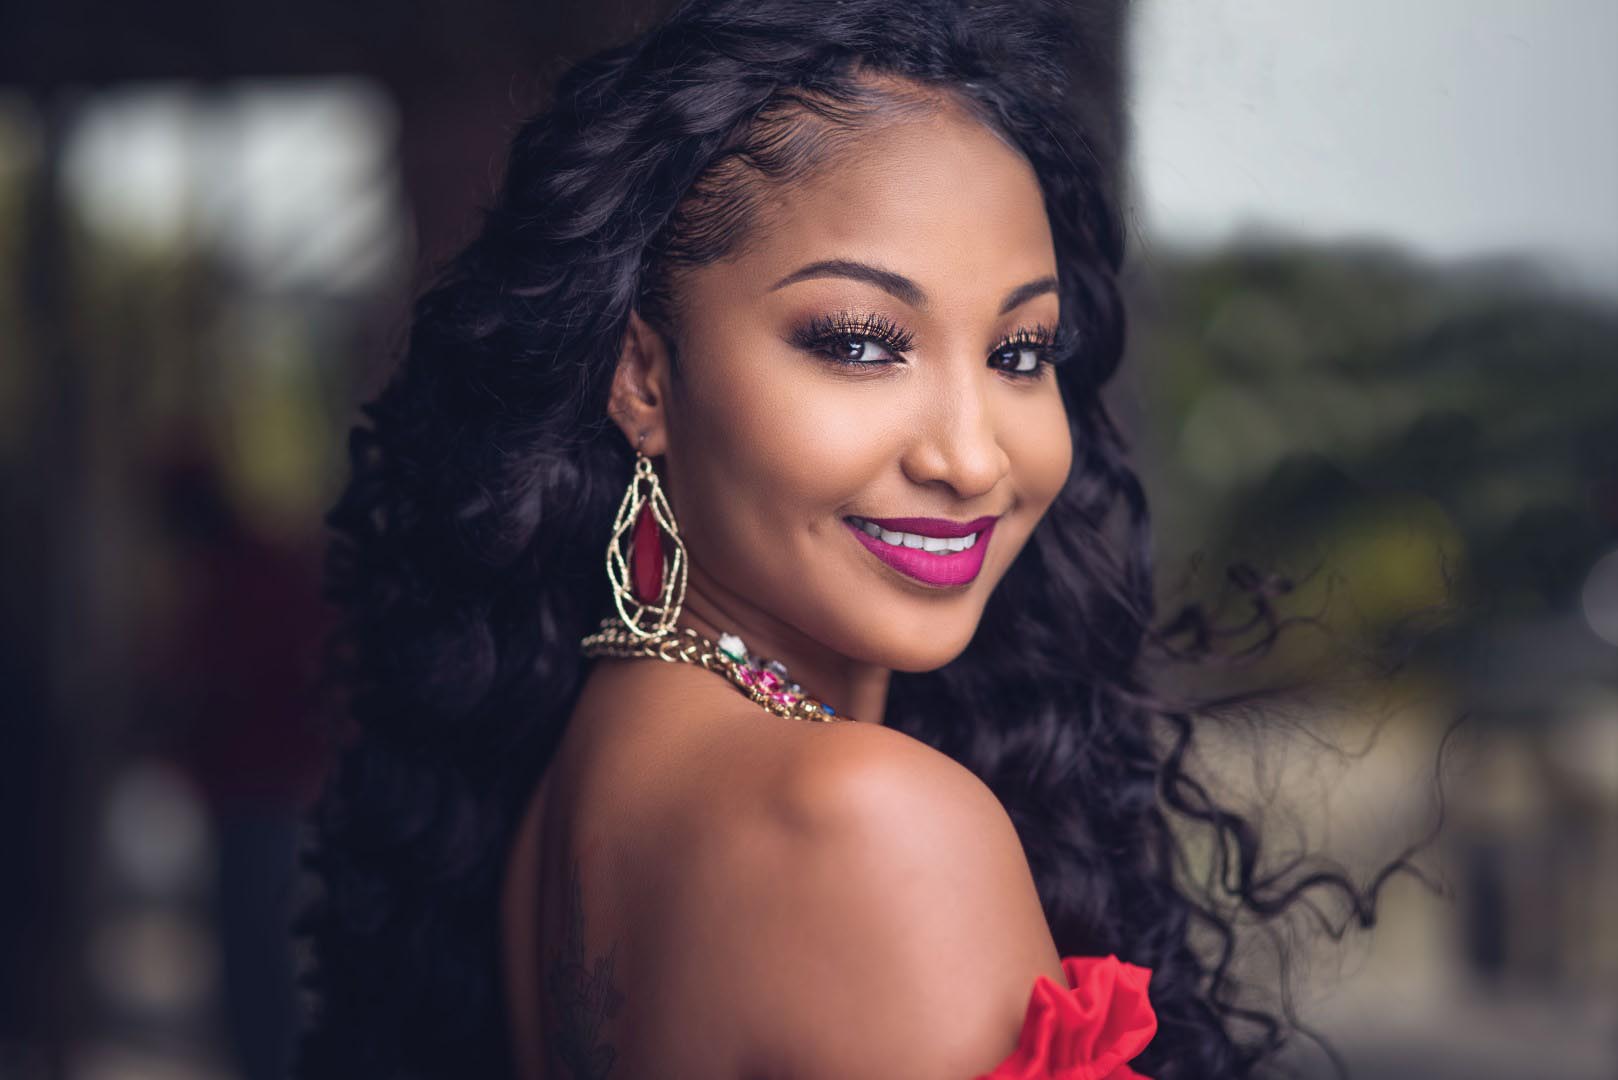 fontana pharmacy Throwback: Shenseea - The World is Hers for the Taking